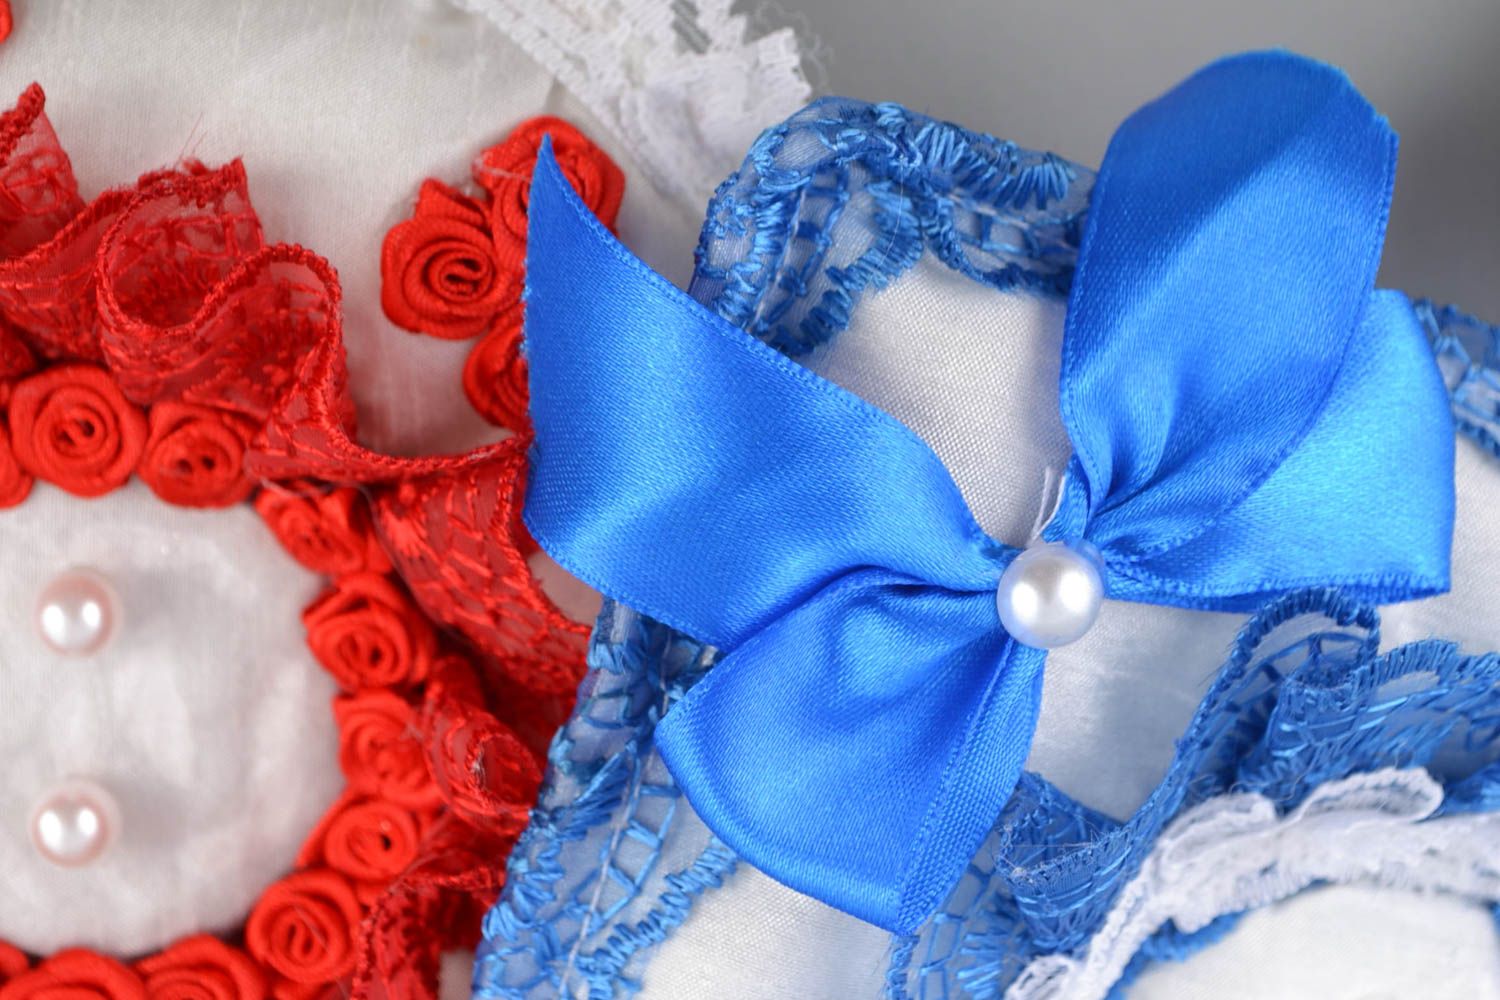 Handmade unusual wedding pillows for rings set of 3 pieces blue red white photo 2